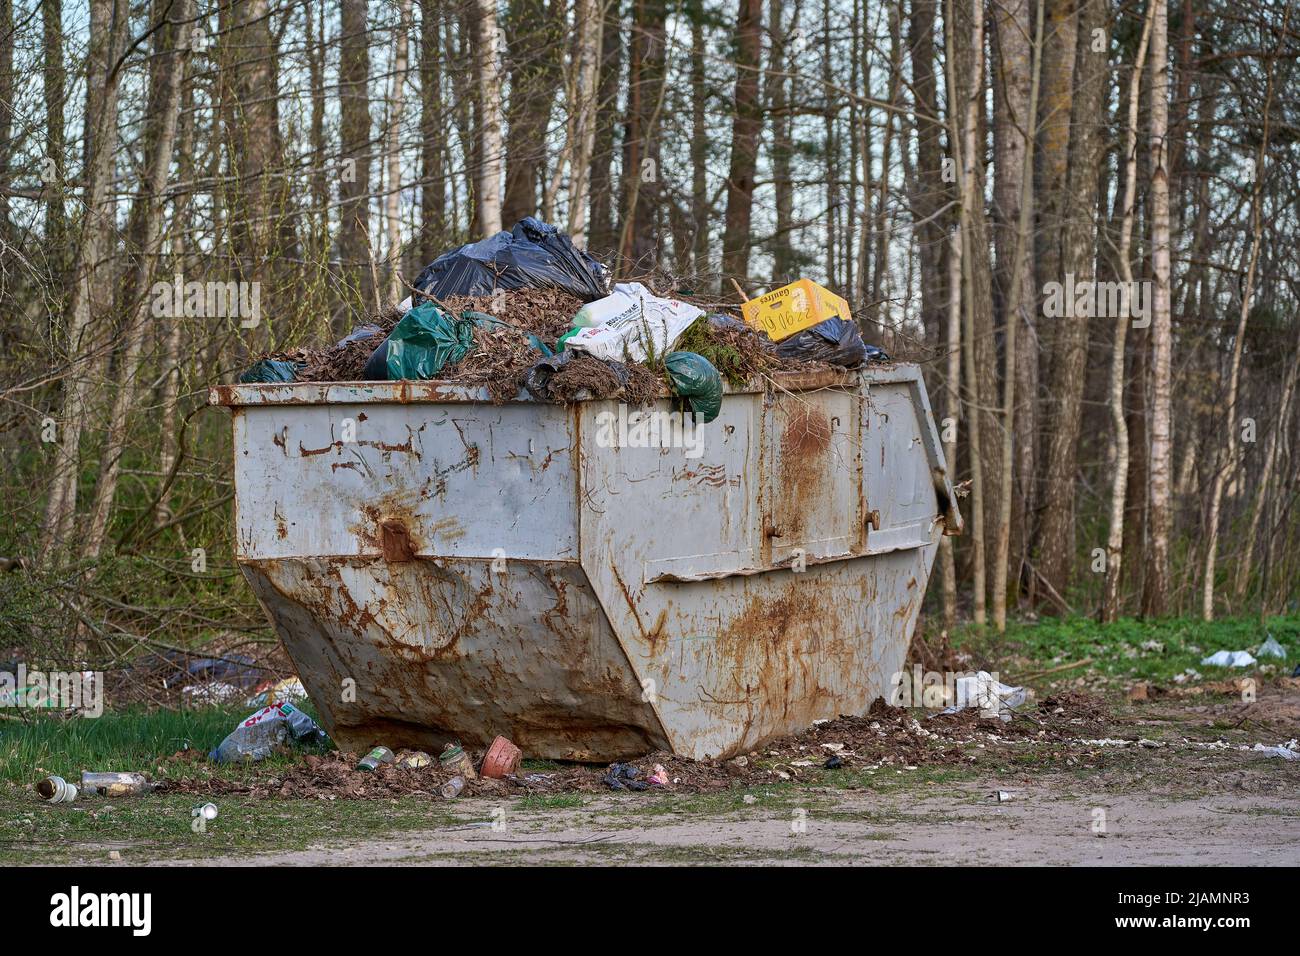 https://c8.alamy.com/comp/2JAMNR3/an-old-rusty-metal-container-overflowing-with-rubbish-some-garbage-lying-around-many-trees-at-the-background-2JAMNR3.jpg